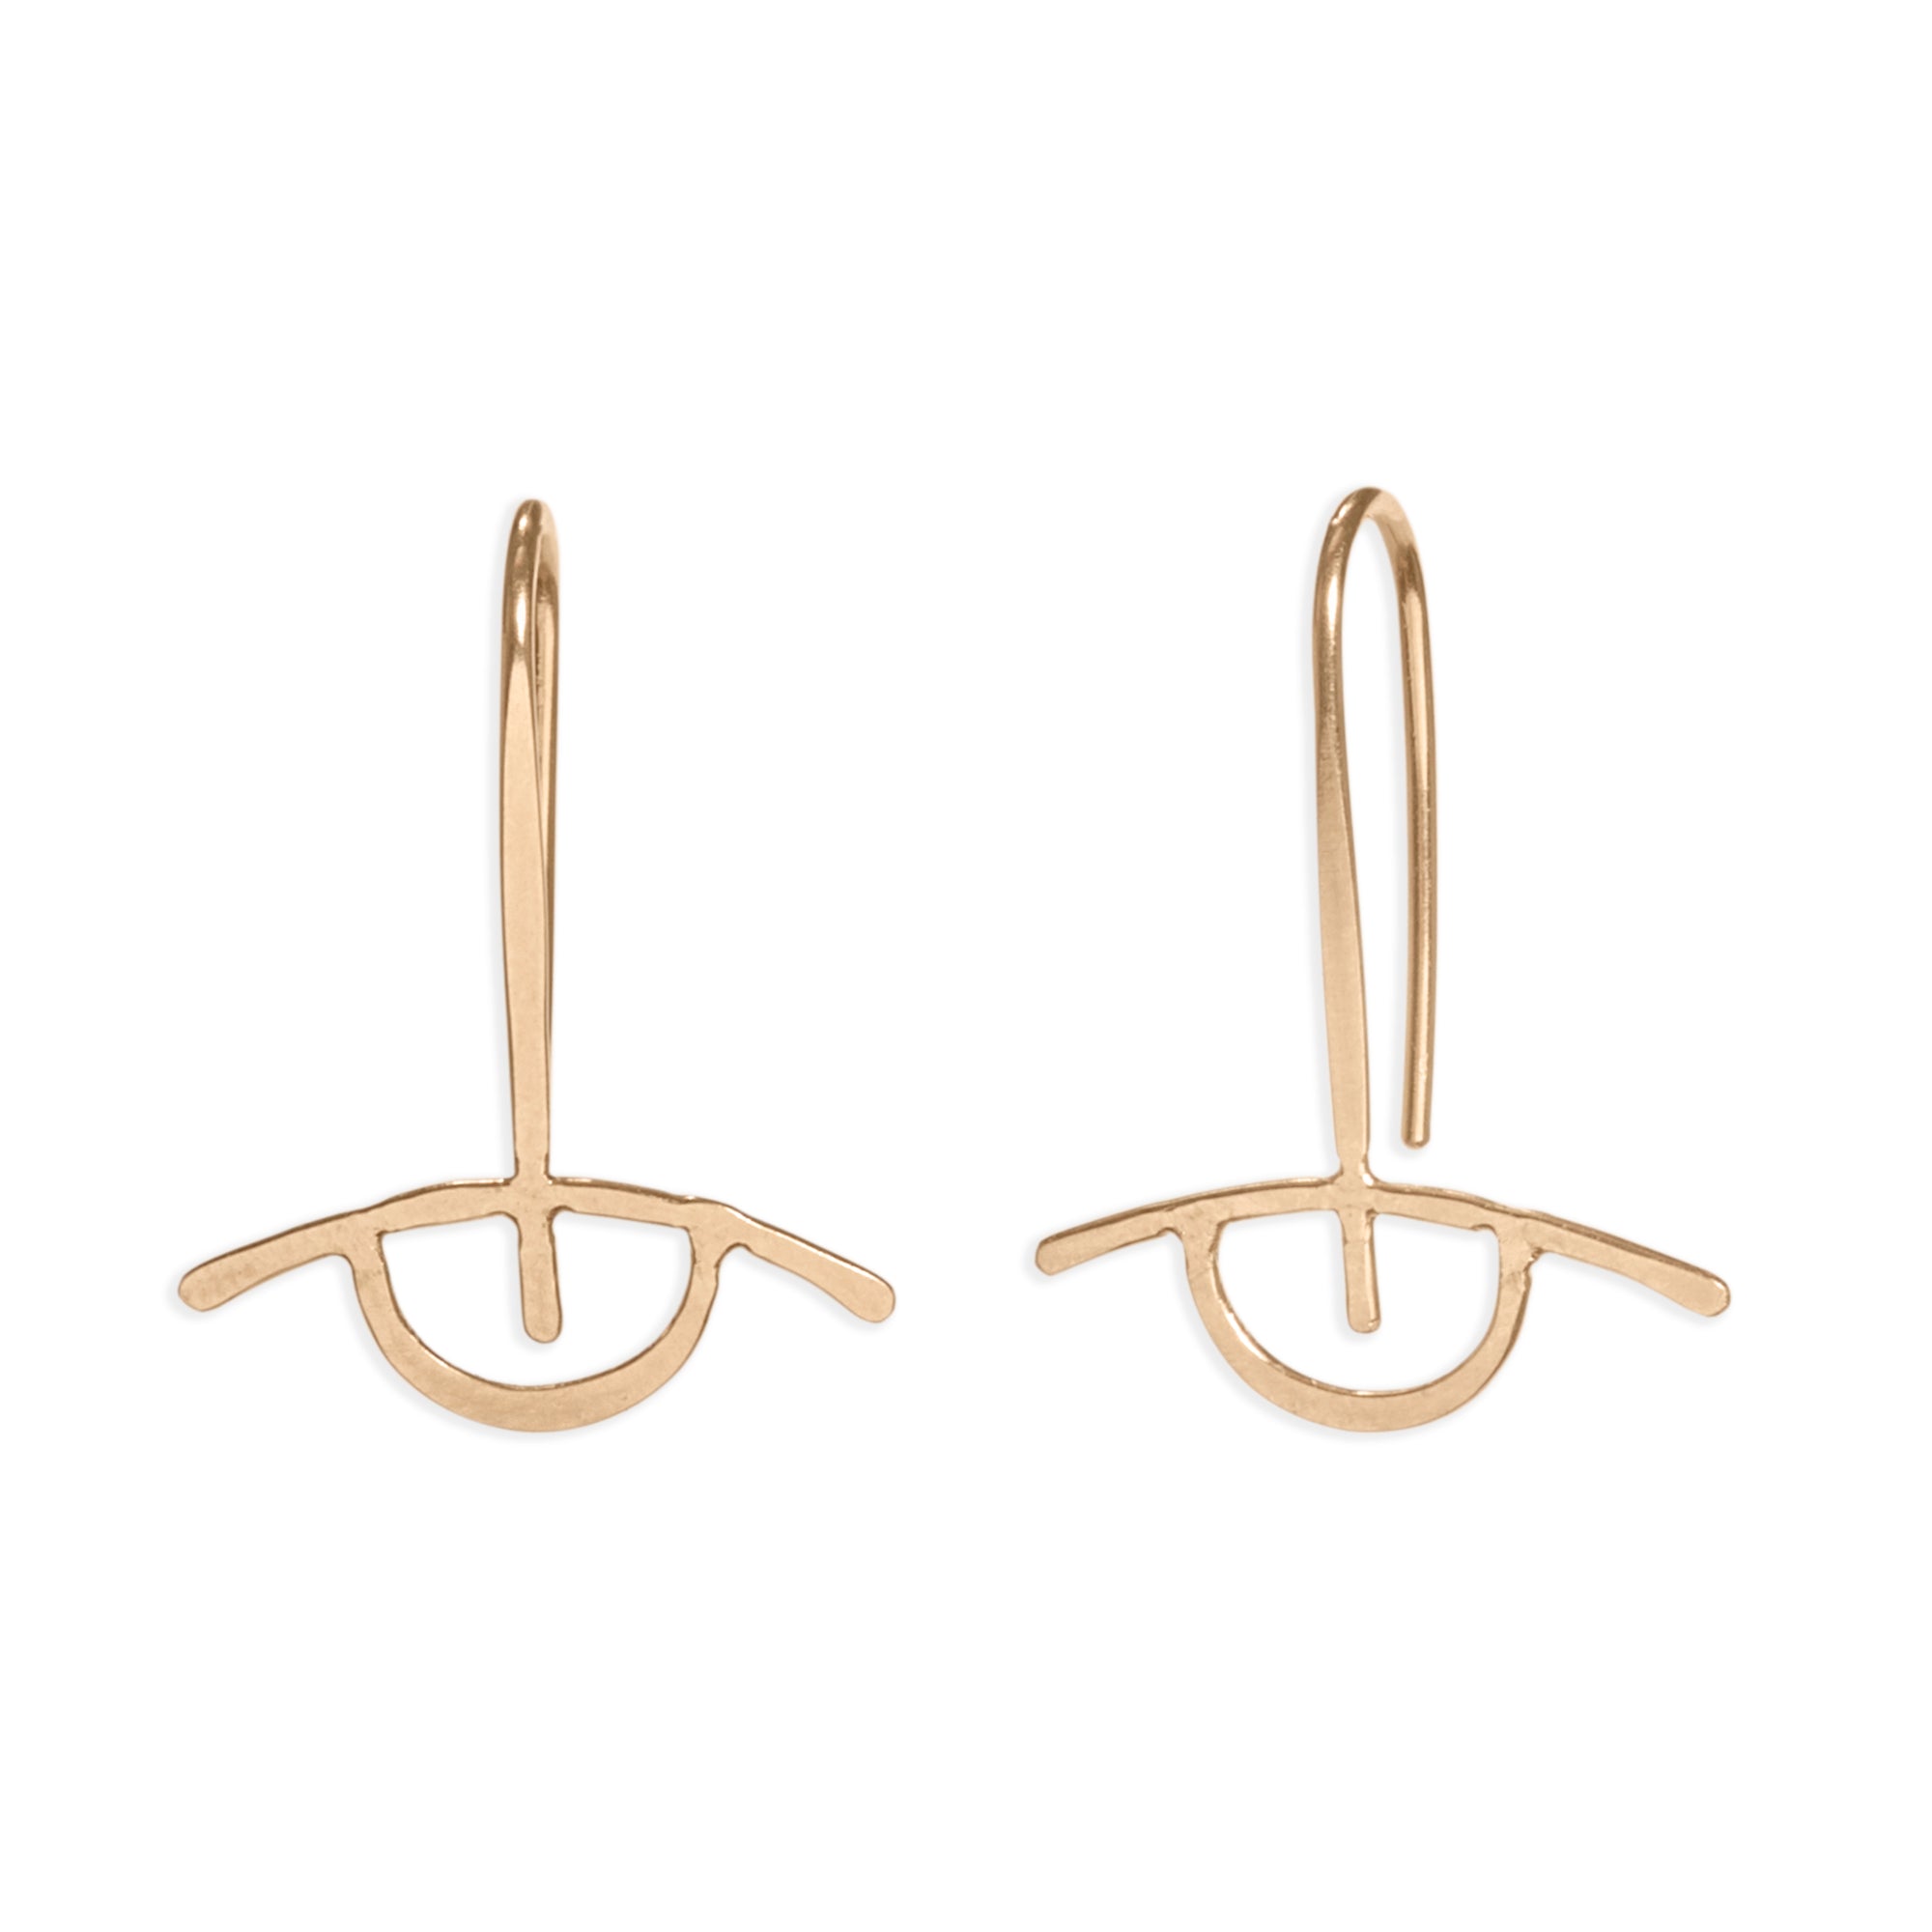 The Altar Hook, 14k gold earrings reminiscing the evil eye symbol, feature a semicircle suspended from a gold wire. 